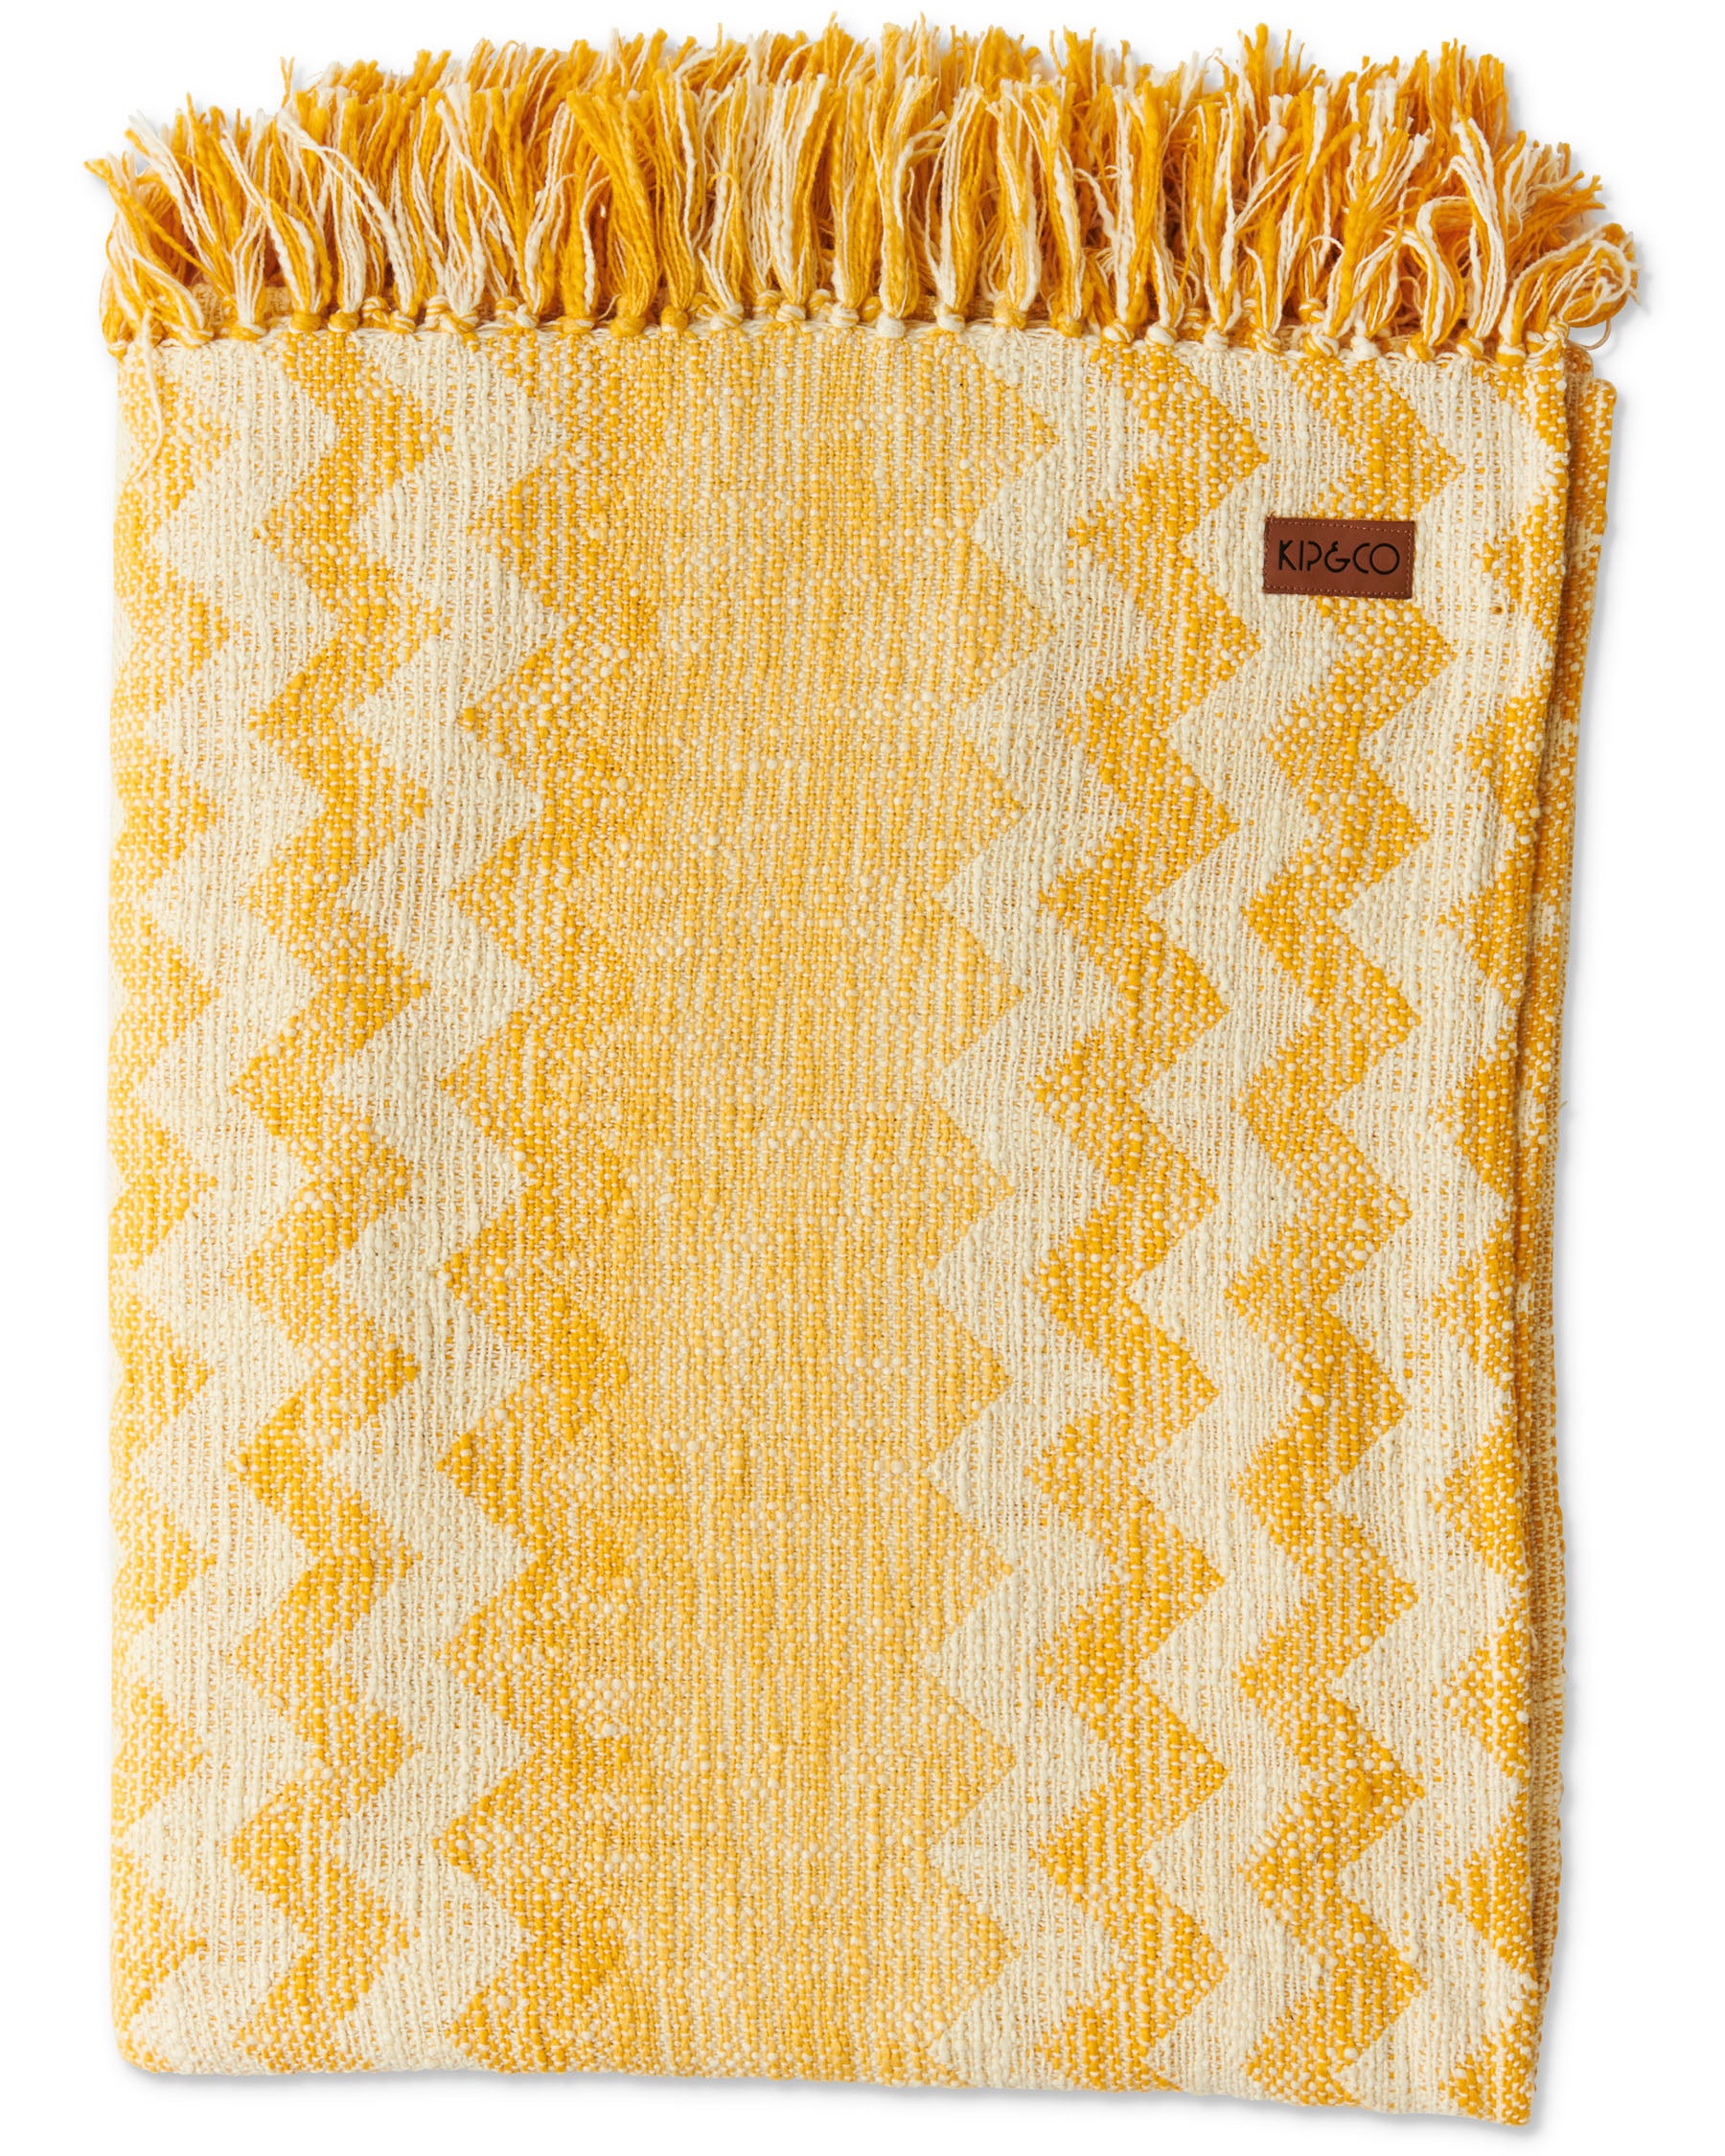 Blankets & Throws | Colourful Tassel Throws & Cotton Knitted Blankets ...